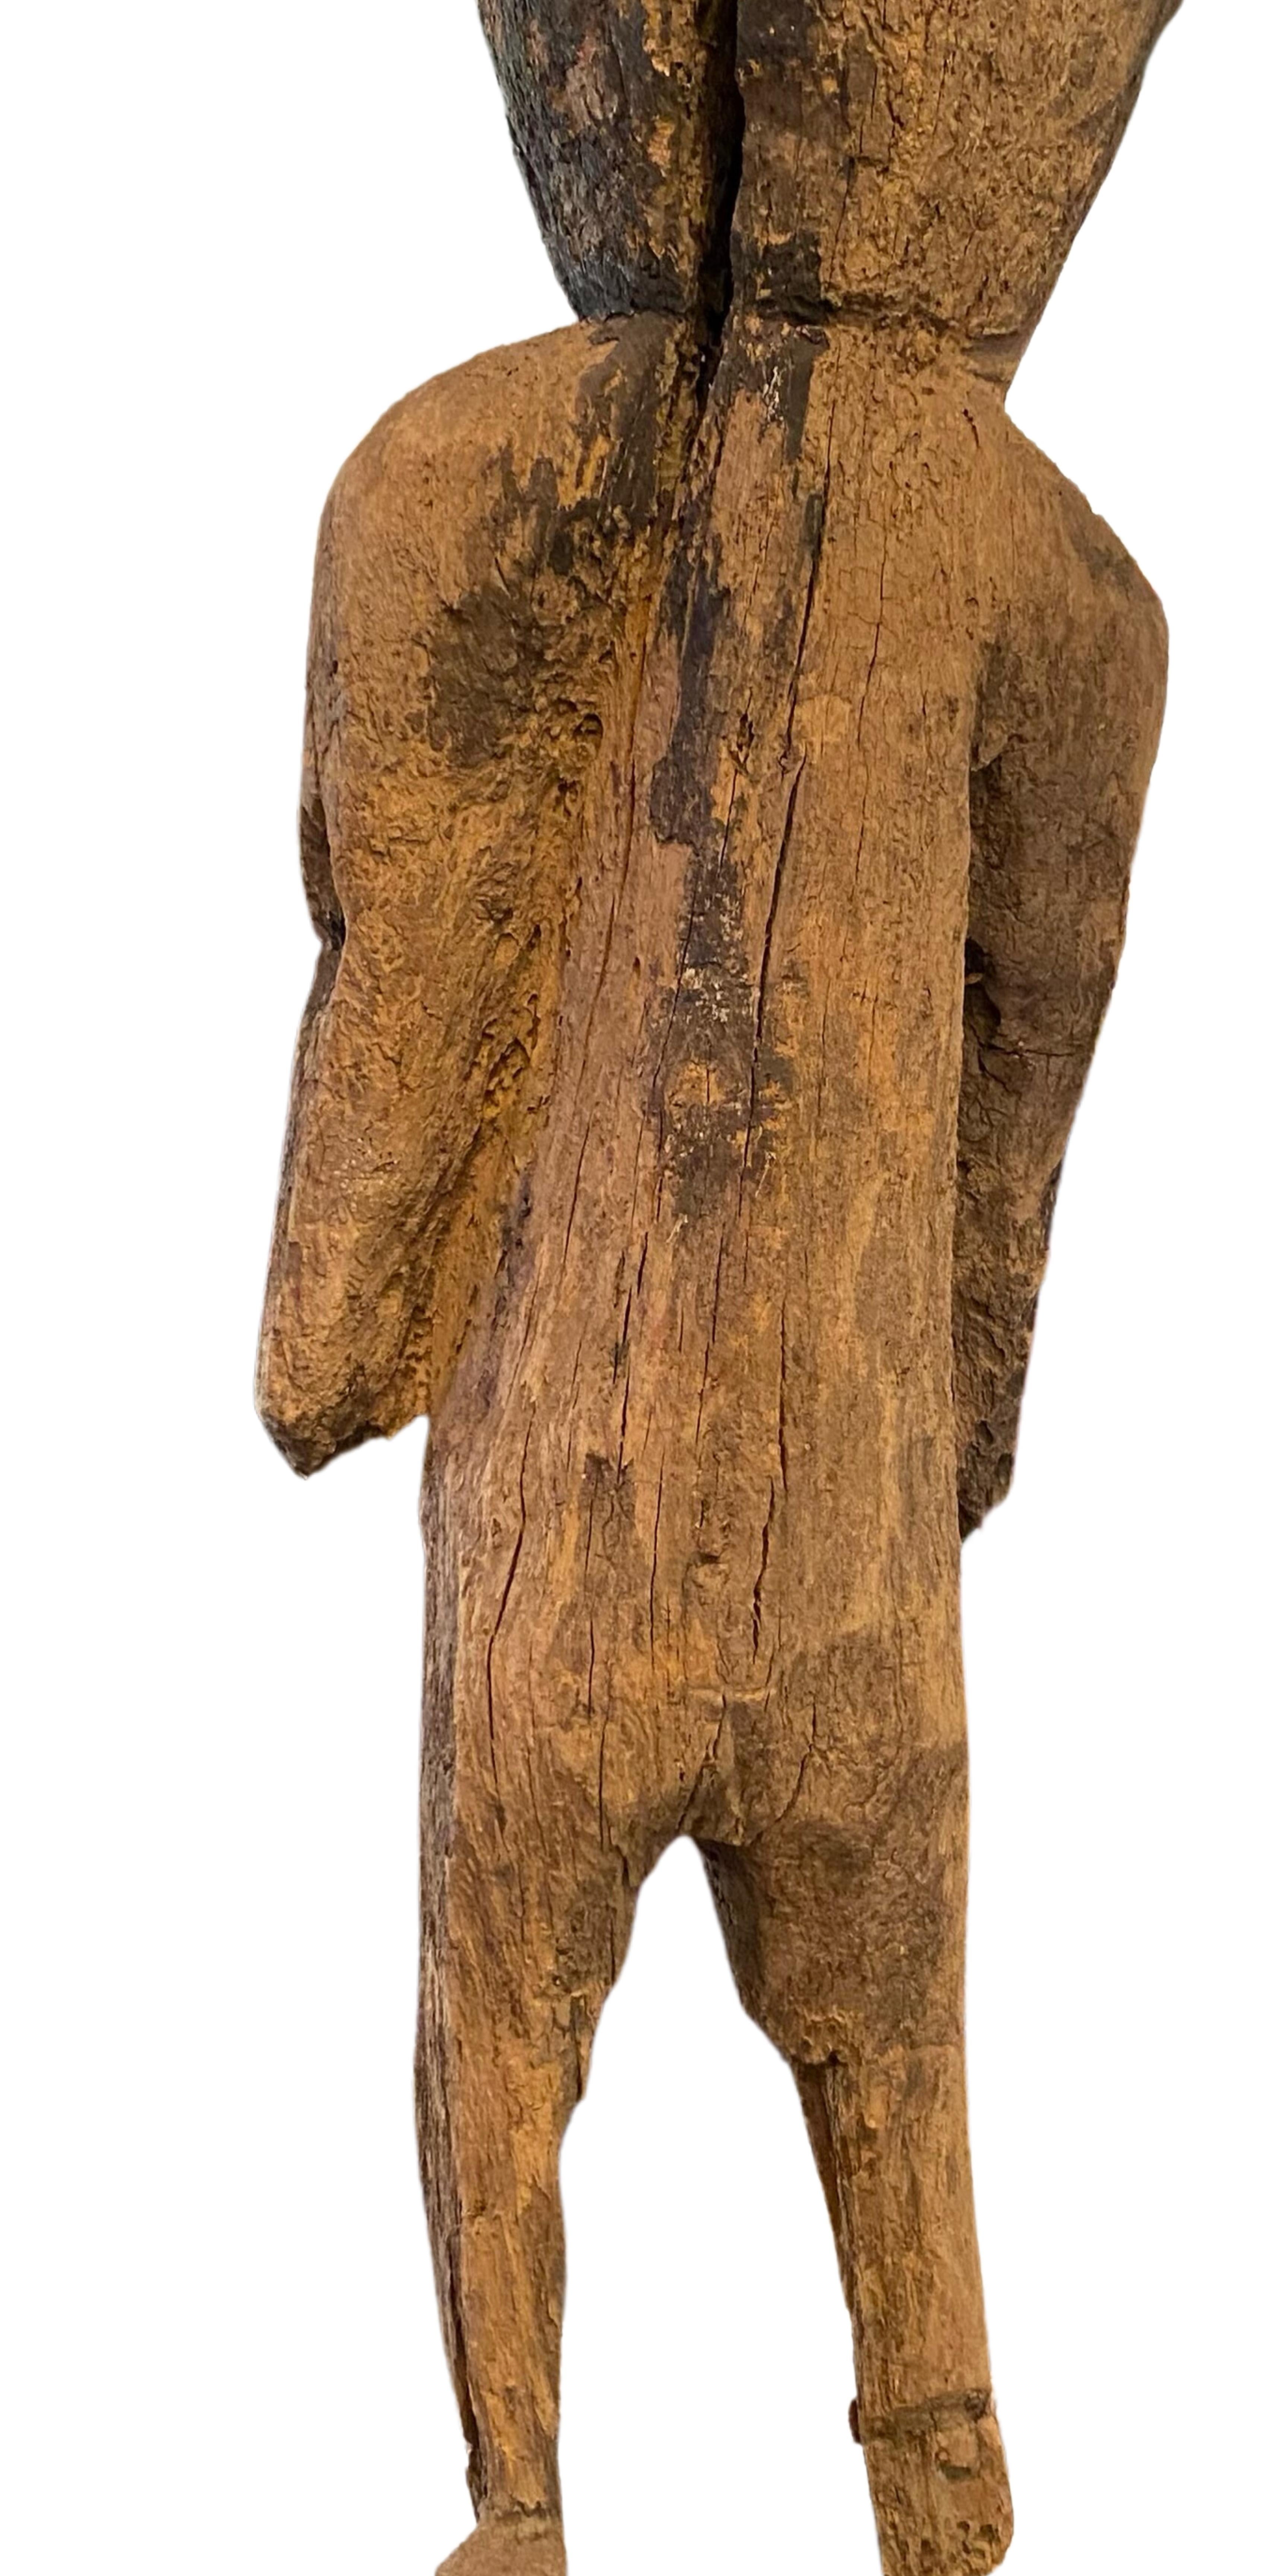 The Monk In Prayer 18 Century Cambodian 
Wooden statue - Brown Figurative Sculpture by Unknown